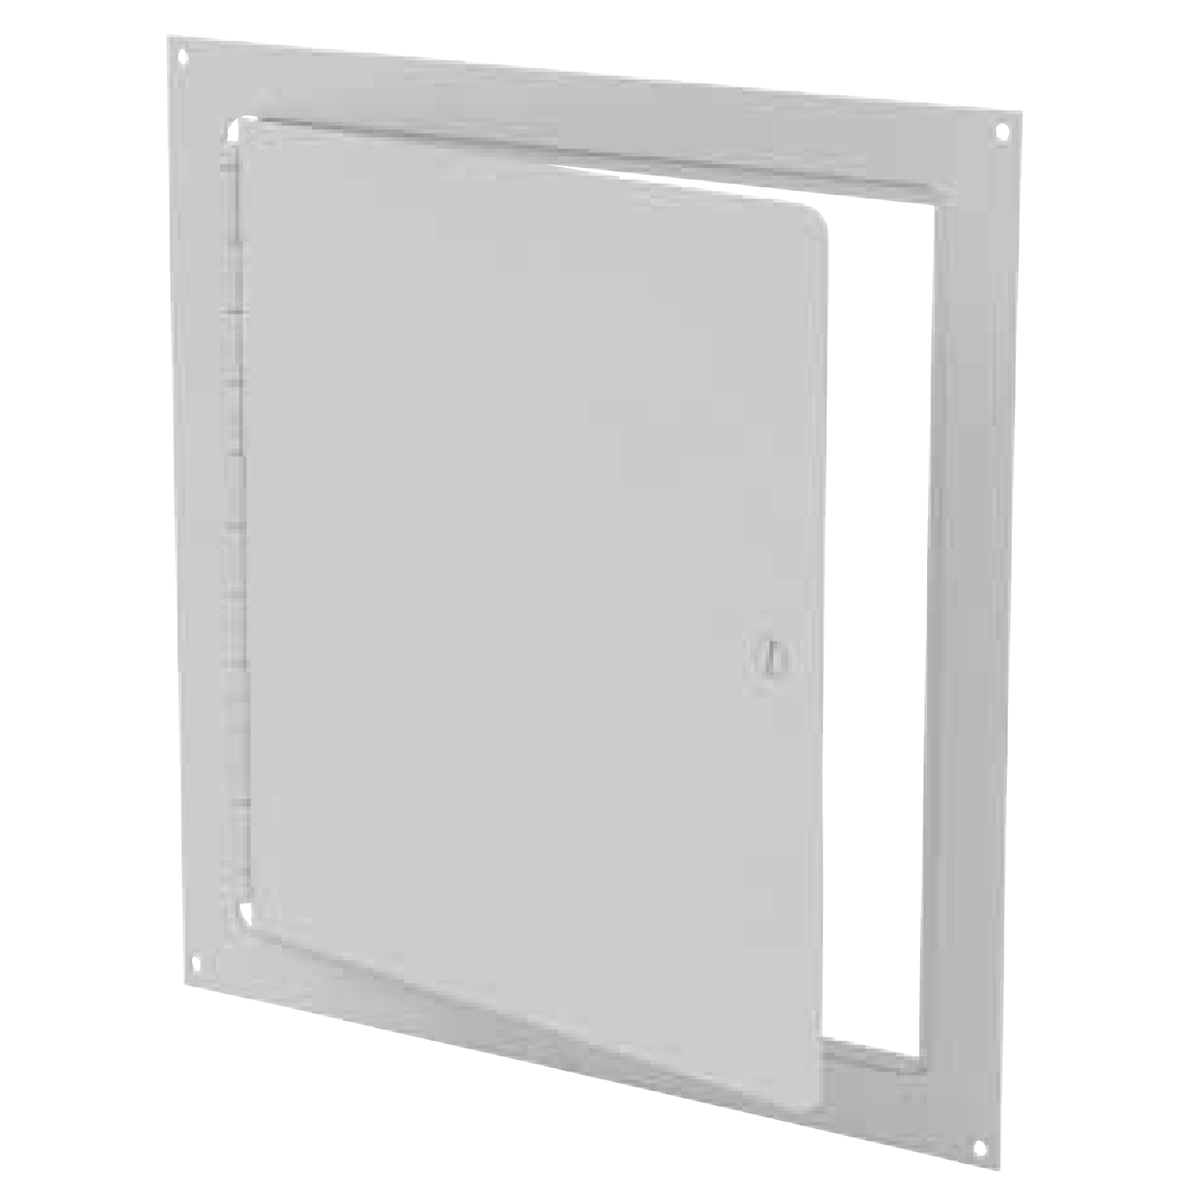 Access Door - E-SF 16x16 Surface Mount, Primer Coated Steel